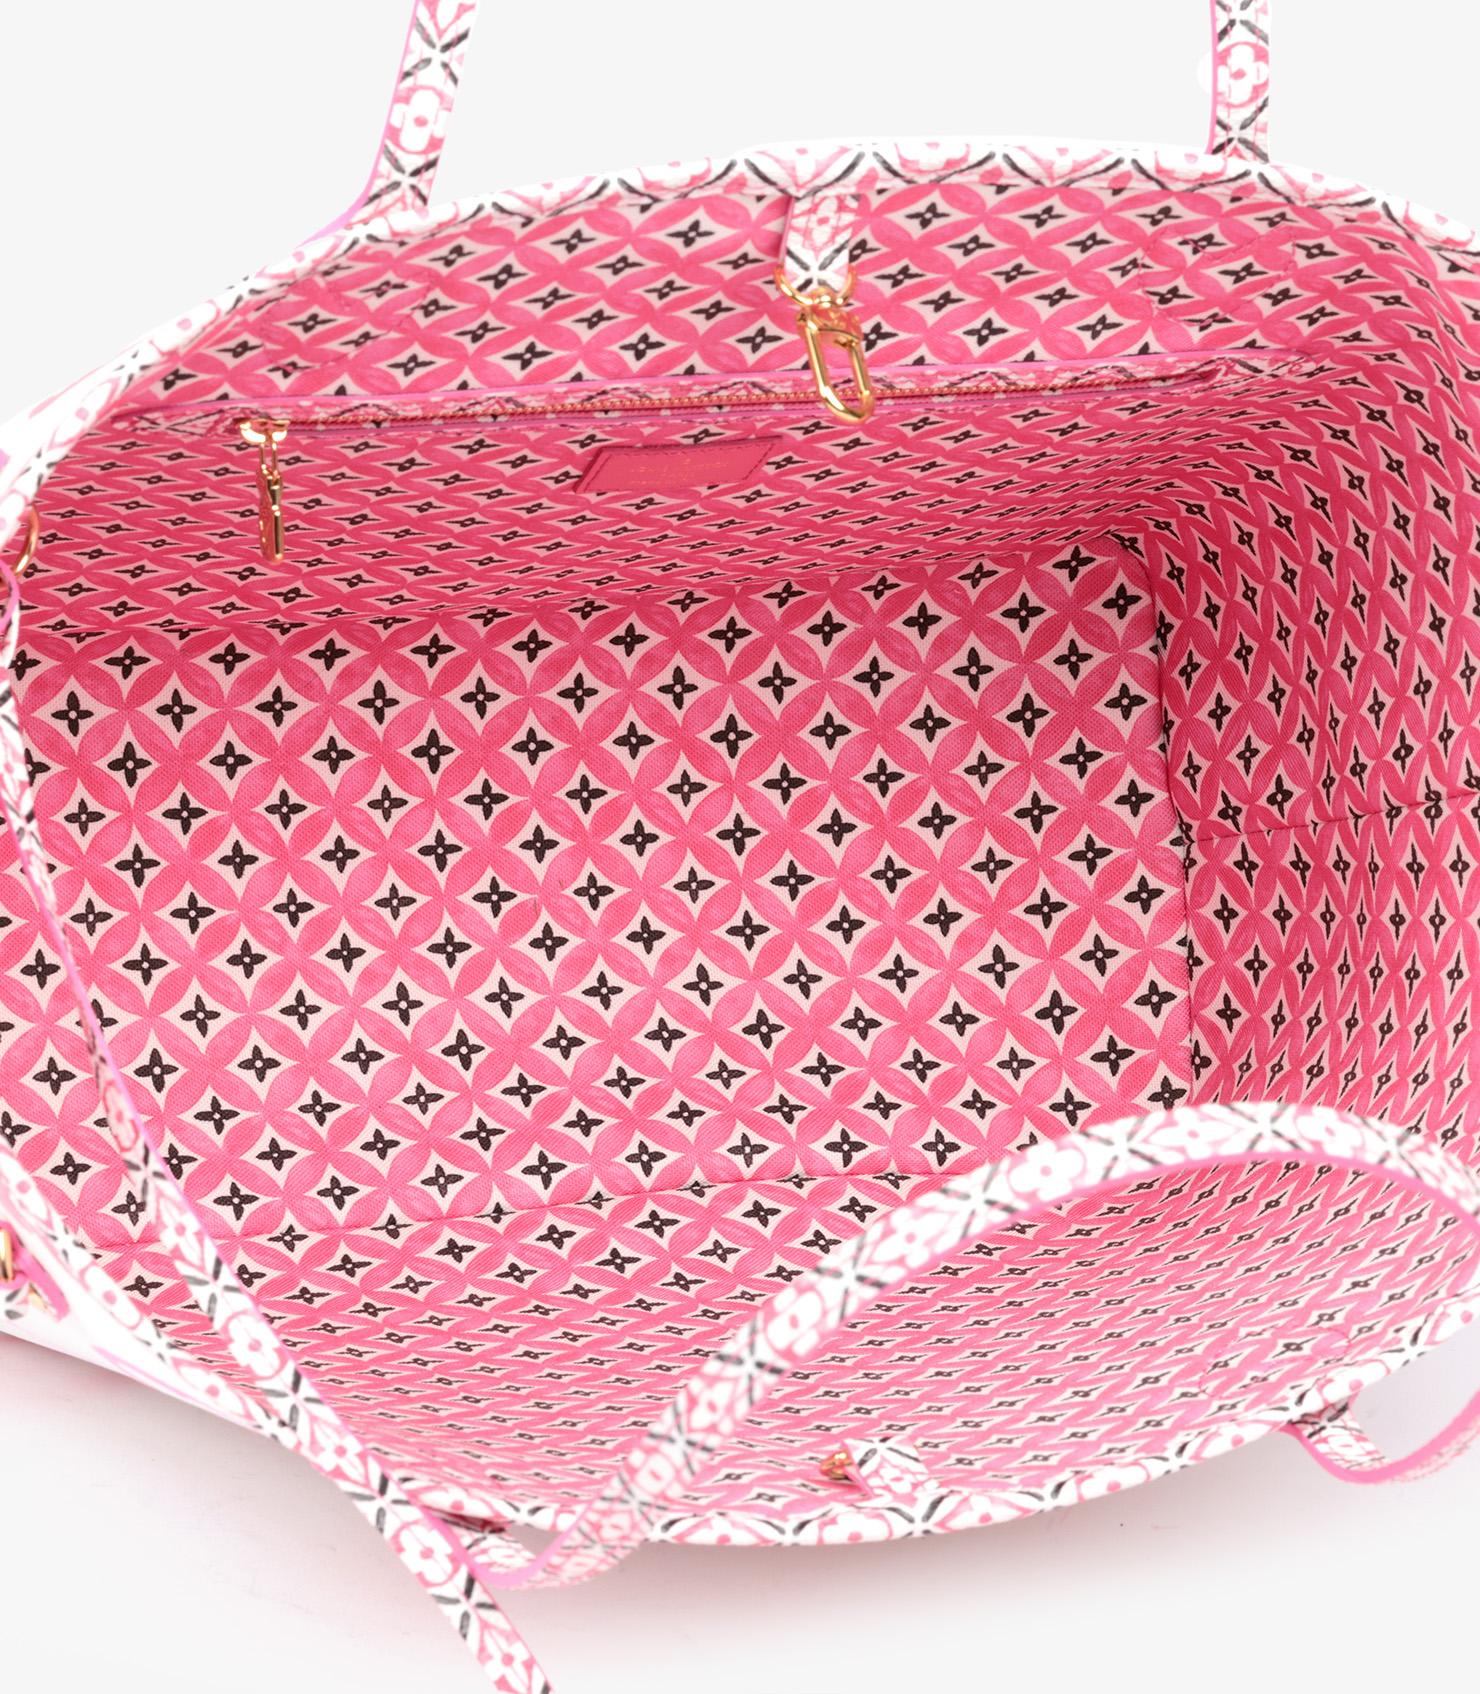 Louis Vuitton White & Pink Monogram Canvas By The Pool Neverfull MM 3